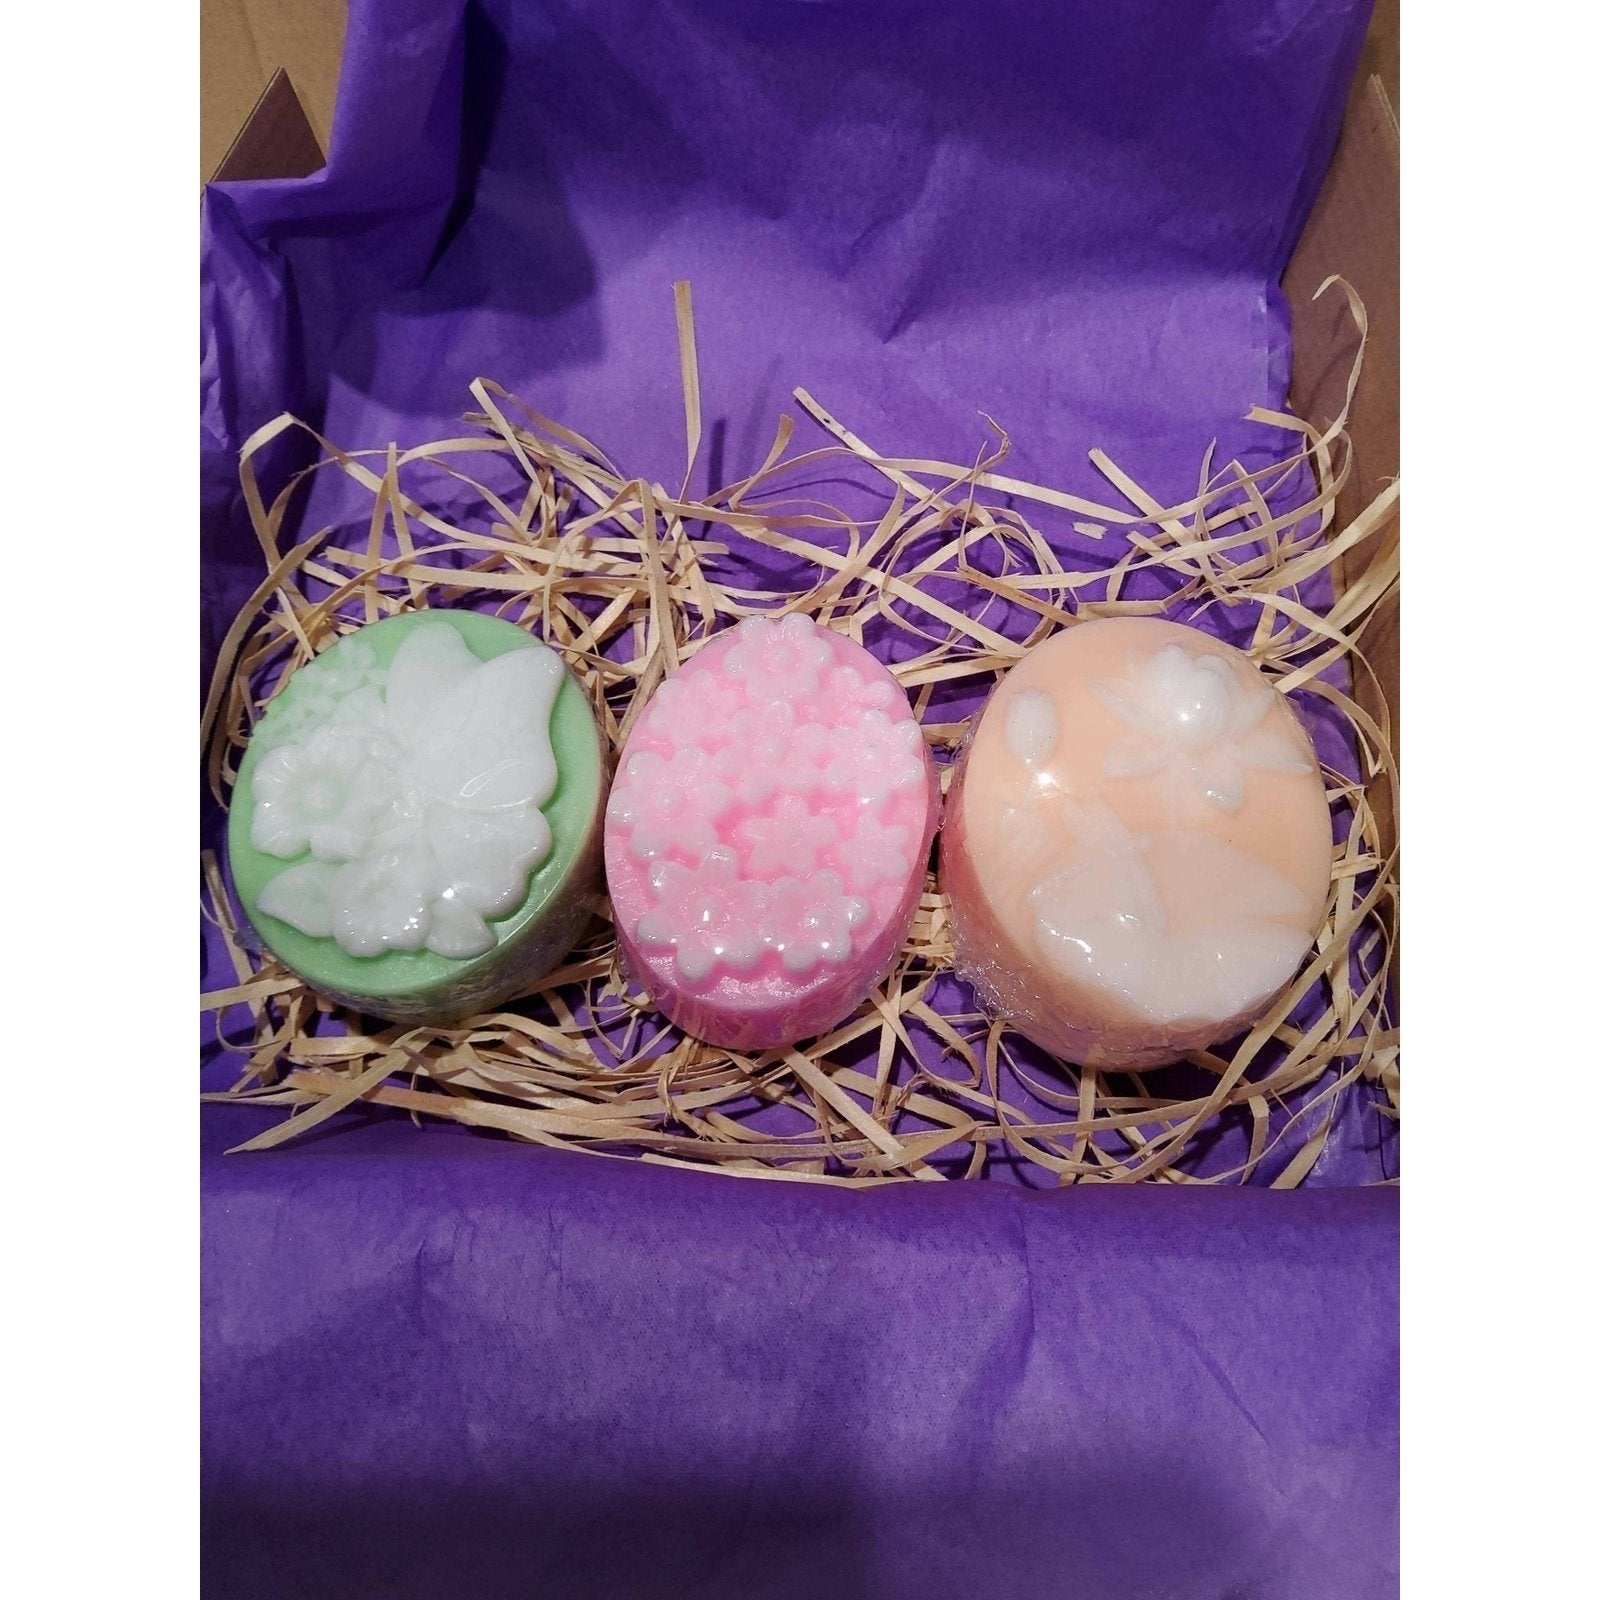 Handmade Soap - Oval - Flowers x 3 Soaps - Giftbox - No Palm Oil - Vegan Friendly - Free Shipping - AMD Touring